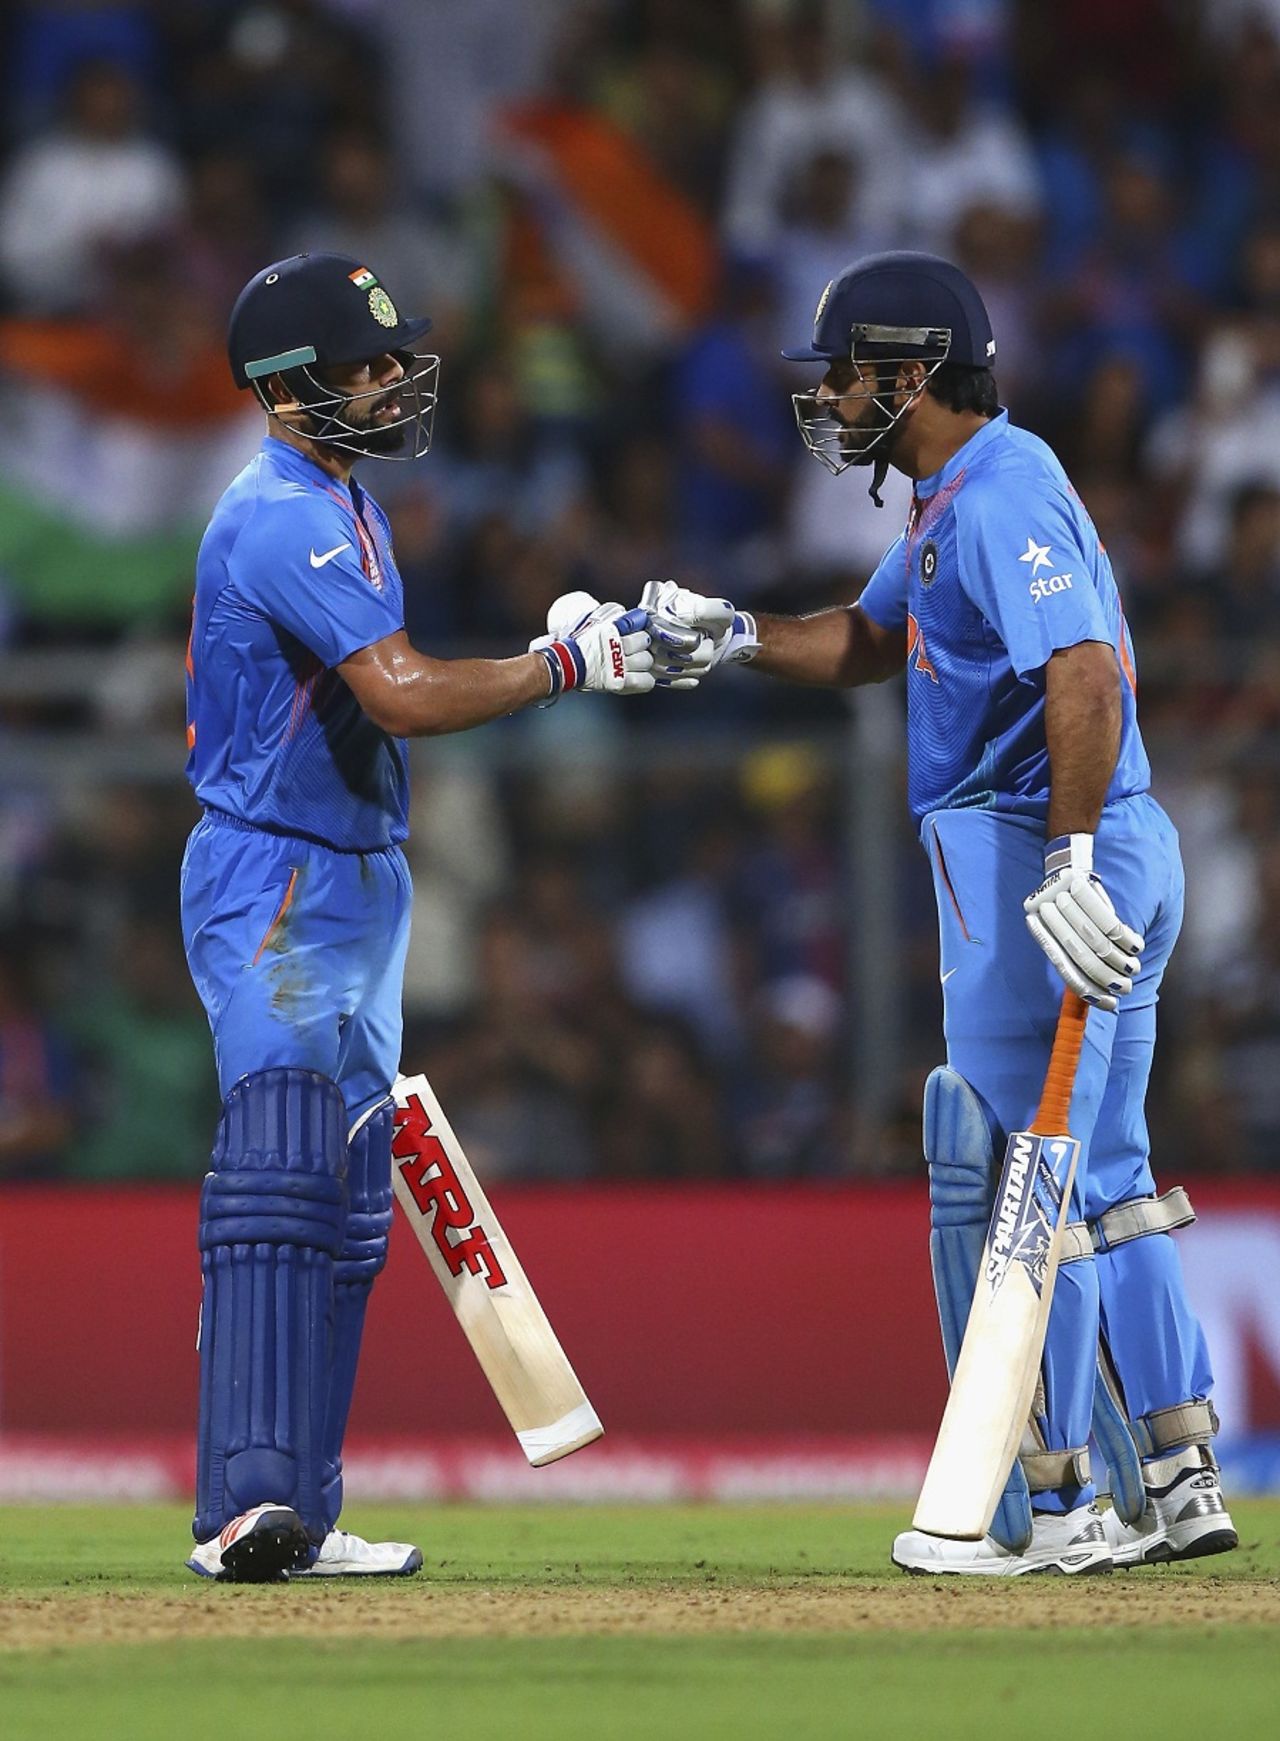 Virat Kohli and MS Dhoni touch gloves during their partnership, India v West Indies, World T20 2016, semi-final, Mumbai, March 31, 2016